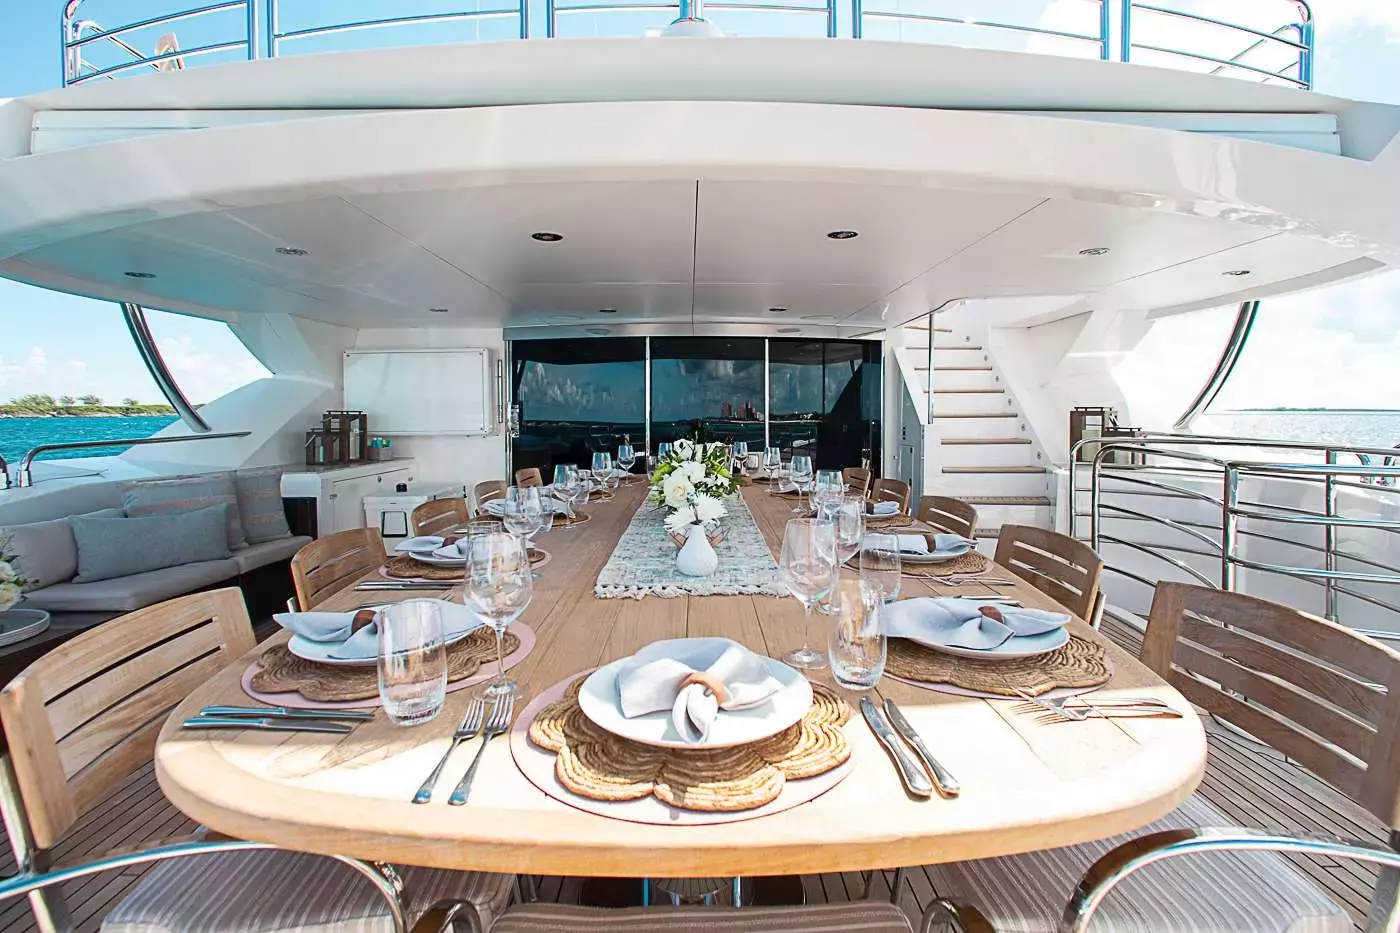 Acacia by Sunseeker - Top rates for a Charter of a private Superyacht in Anguilla